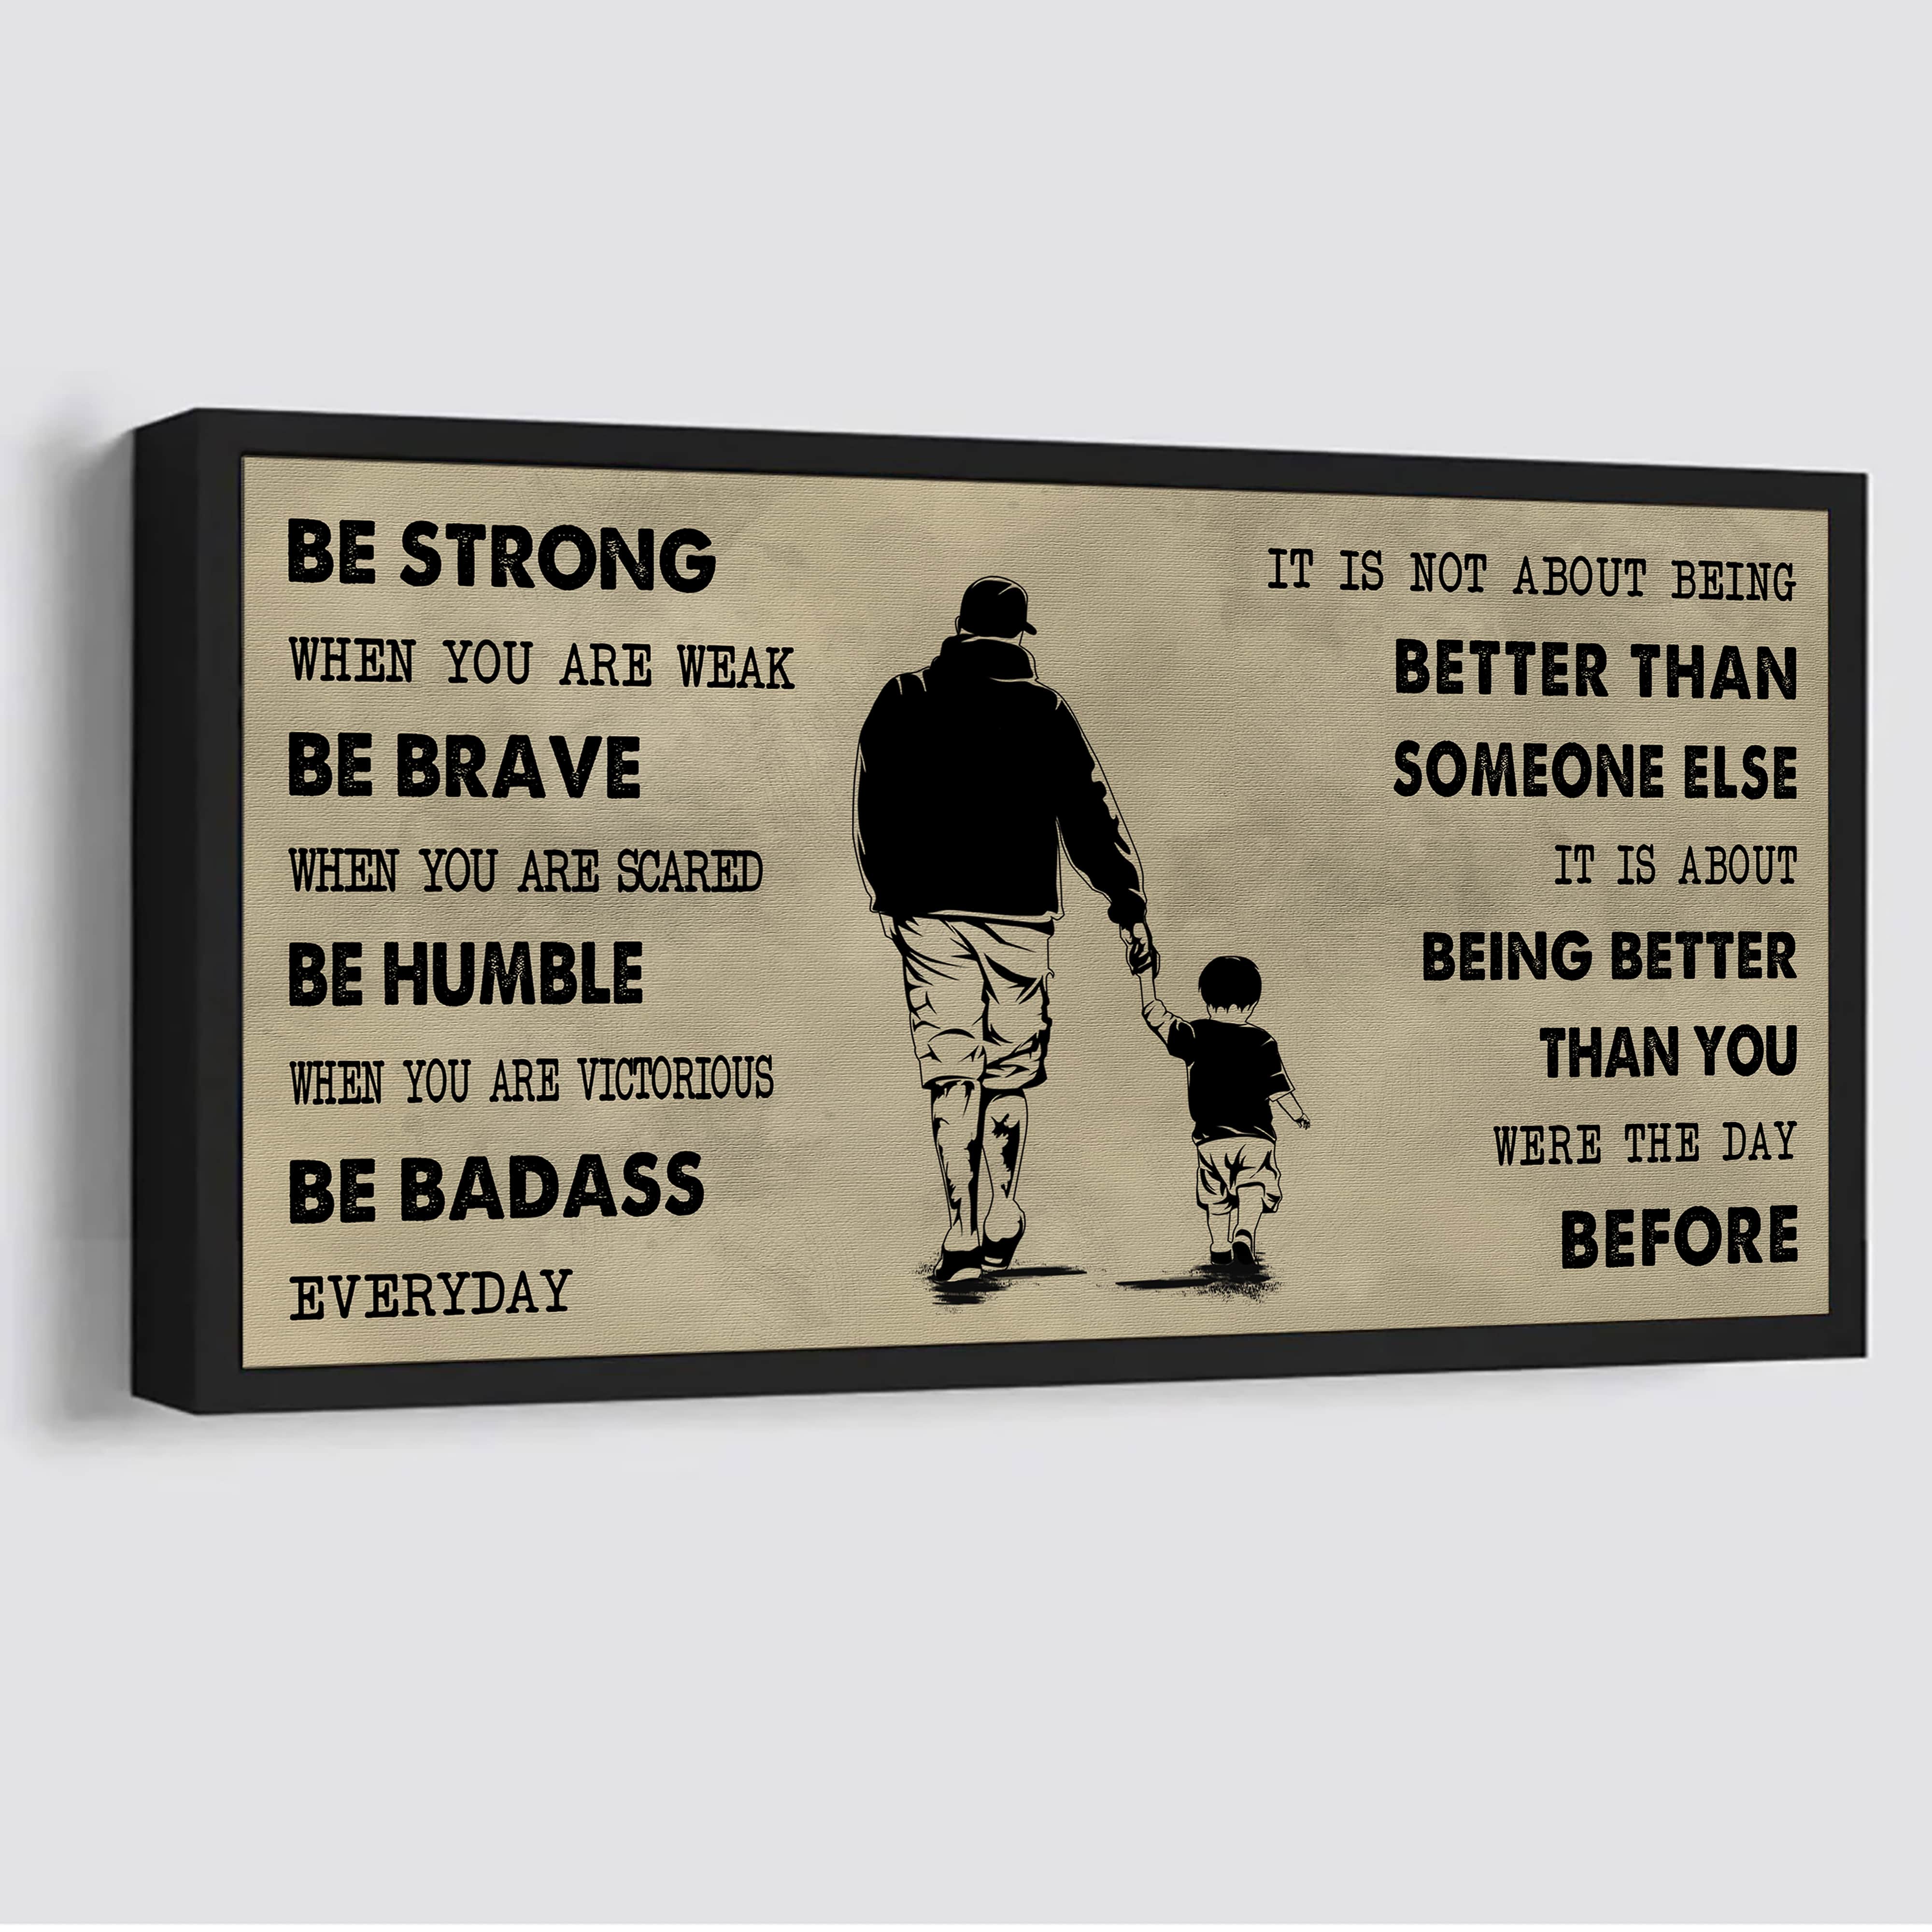 Baseball Poster Canvas From Dad To Son Be Strong When You Are Weak - It Is Not About Being Better Than Someone Else